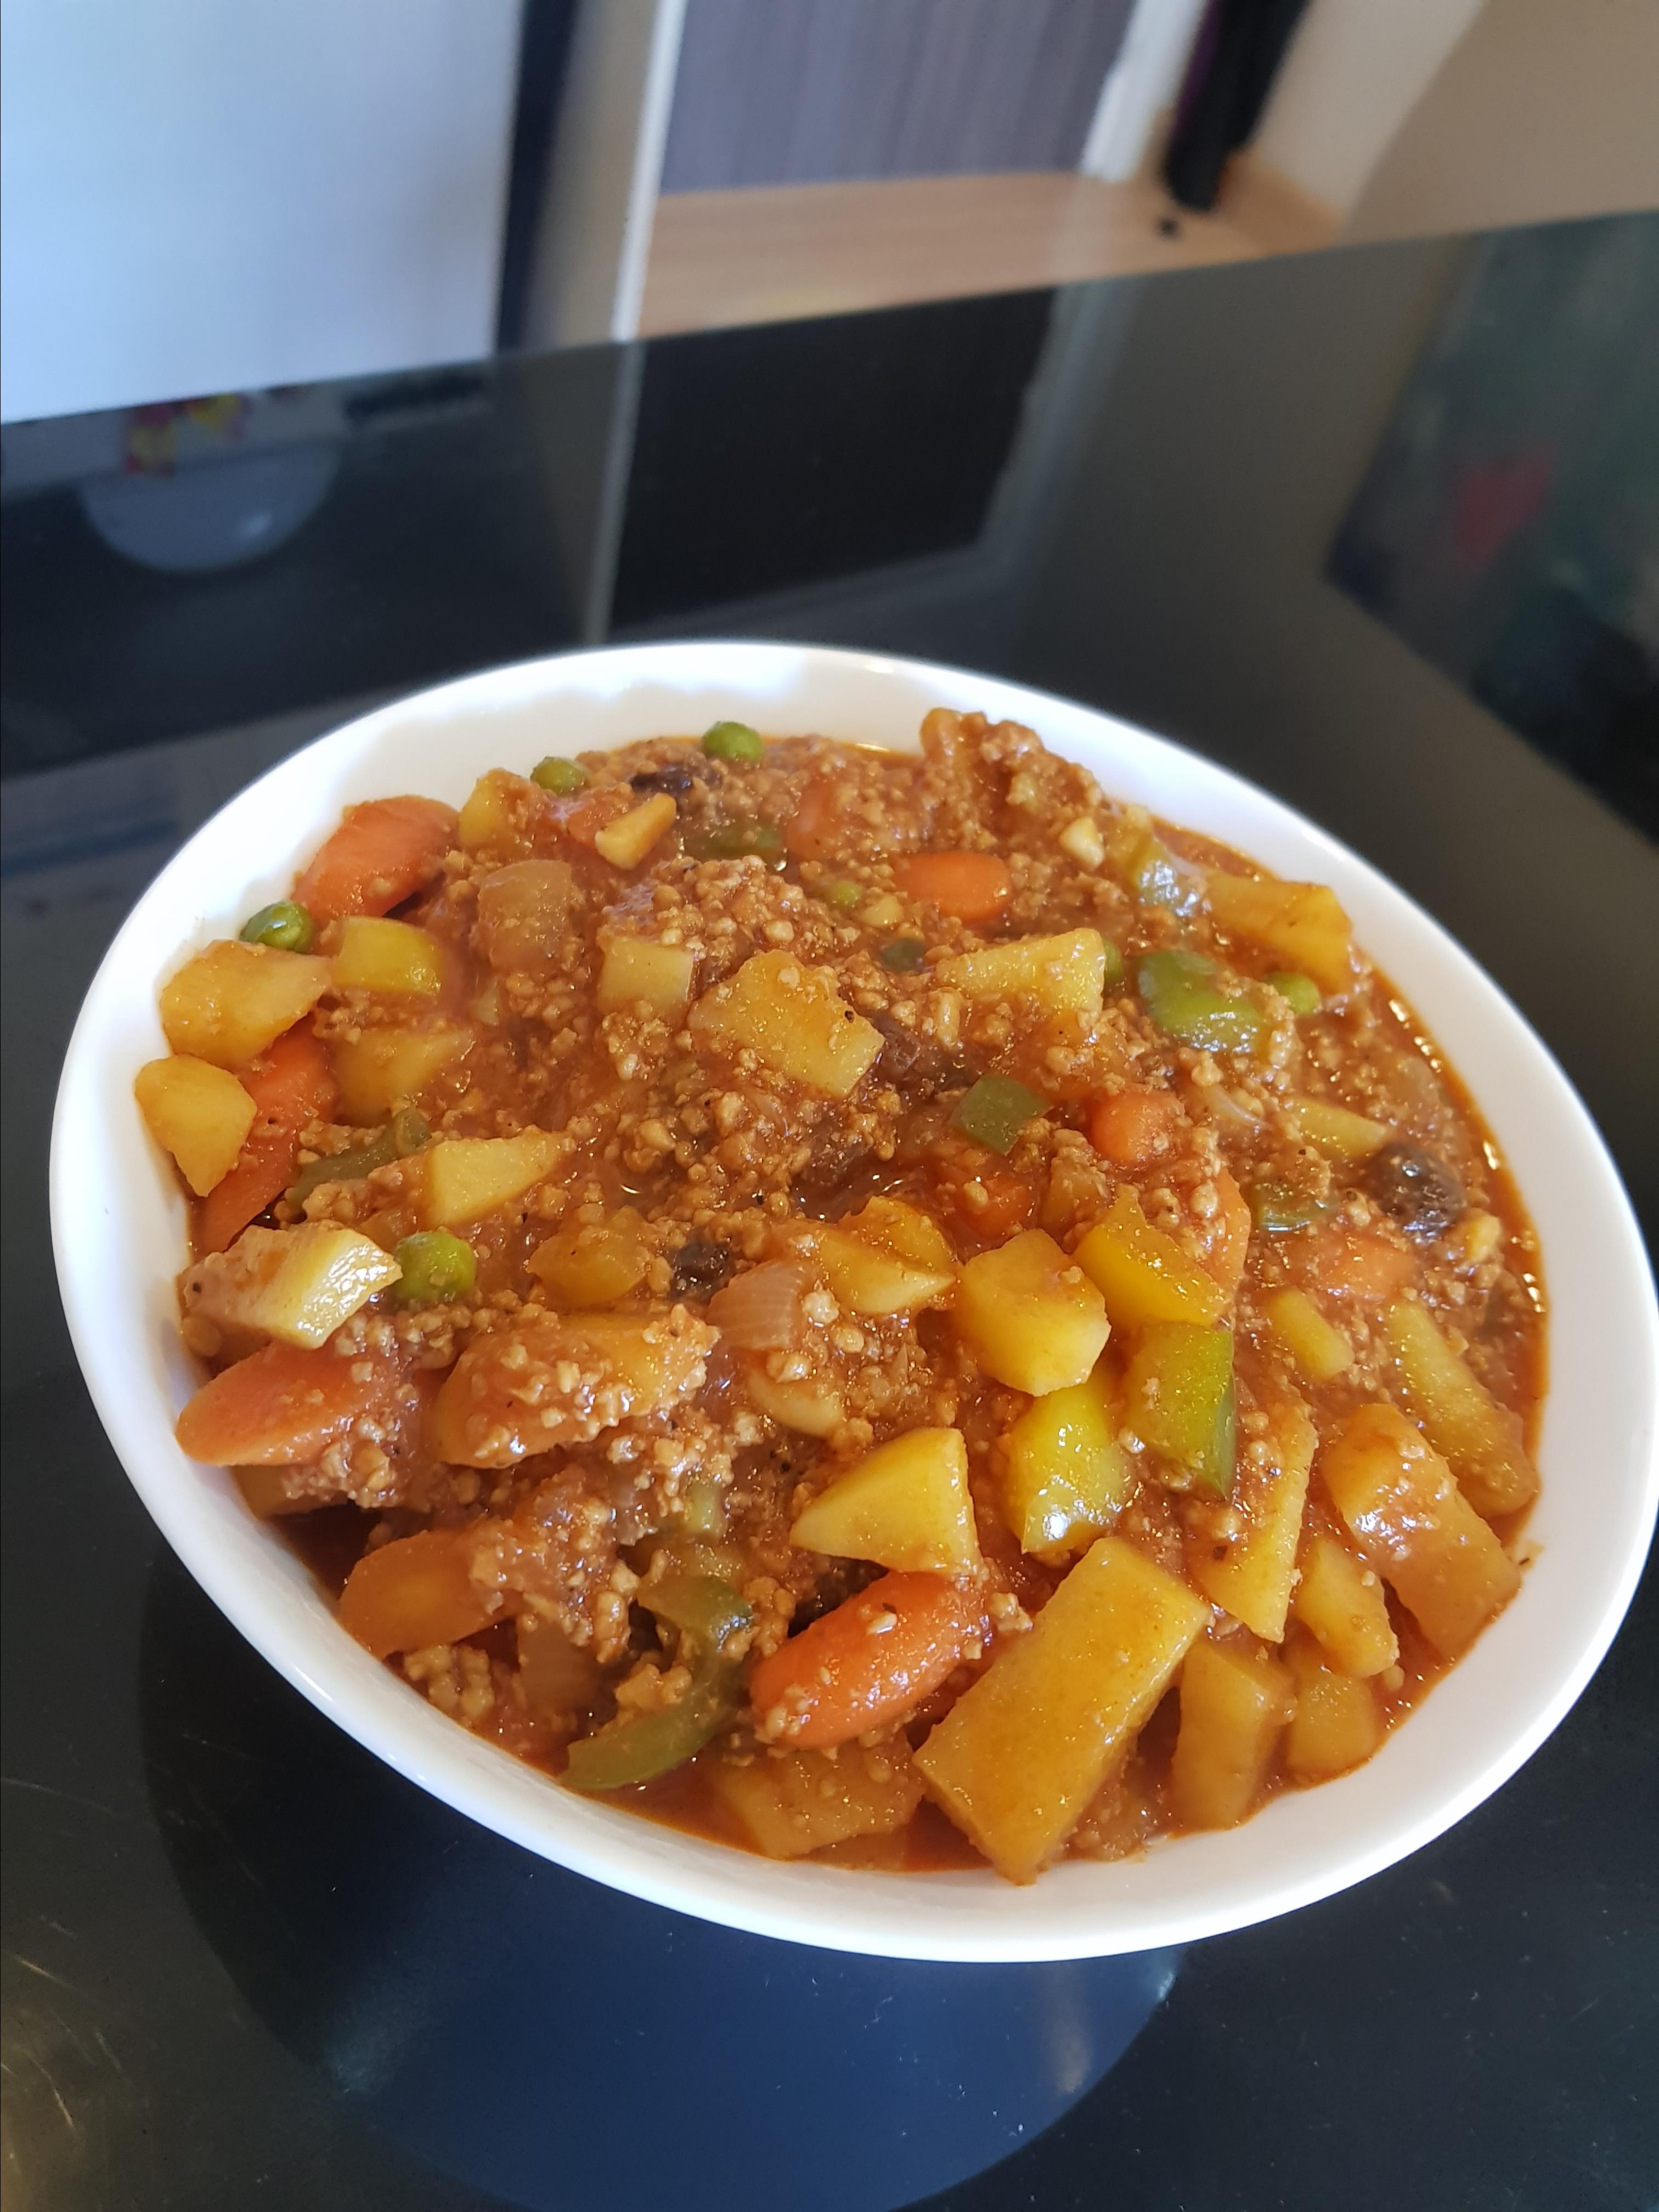 <p>This Filipino comfort food features ground beef, vegetables, raisins, and tomato sauce. "One of my favorite childhood dishes," says Bea. "This recipe is really yummy, thank you!"</p>
                          